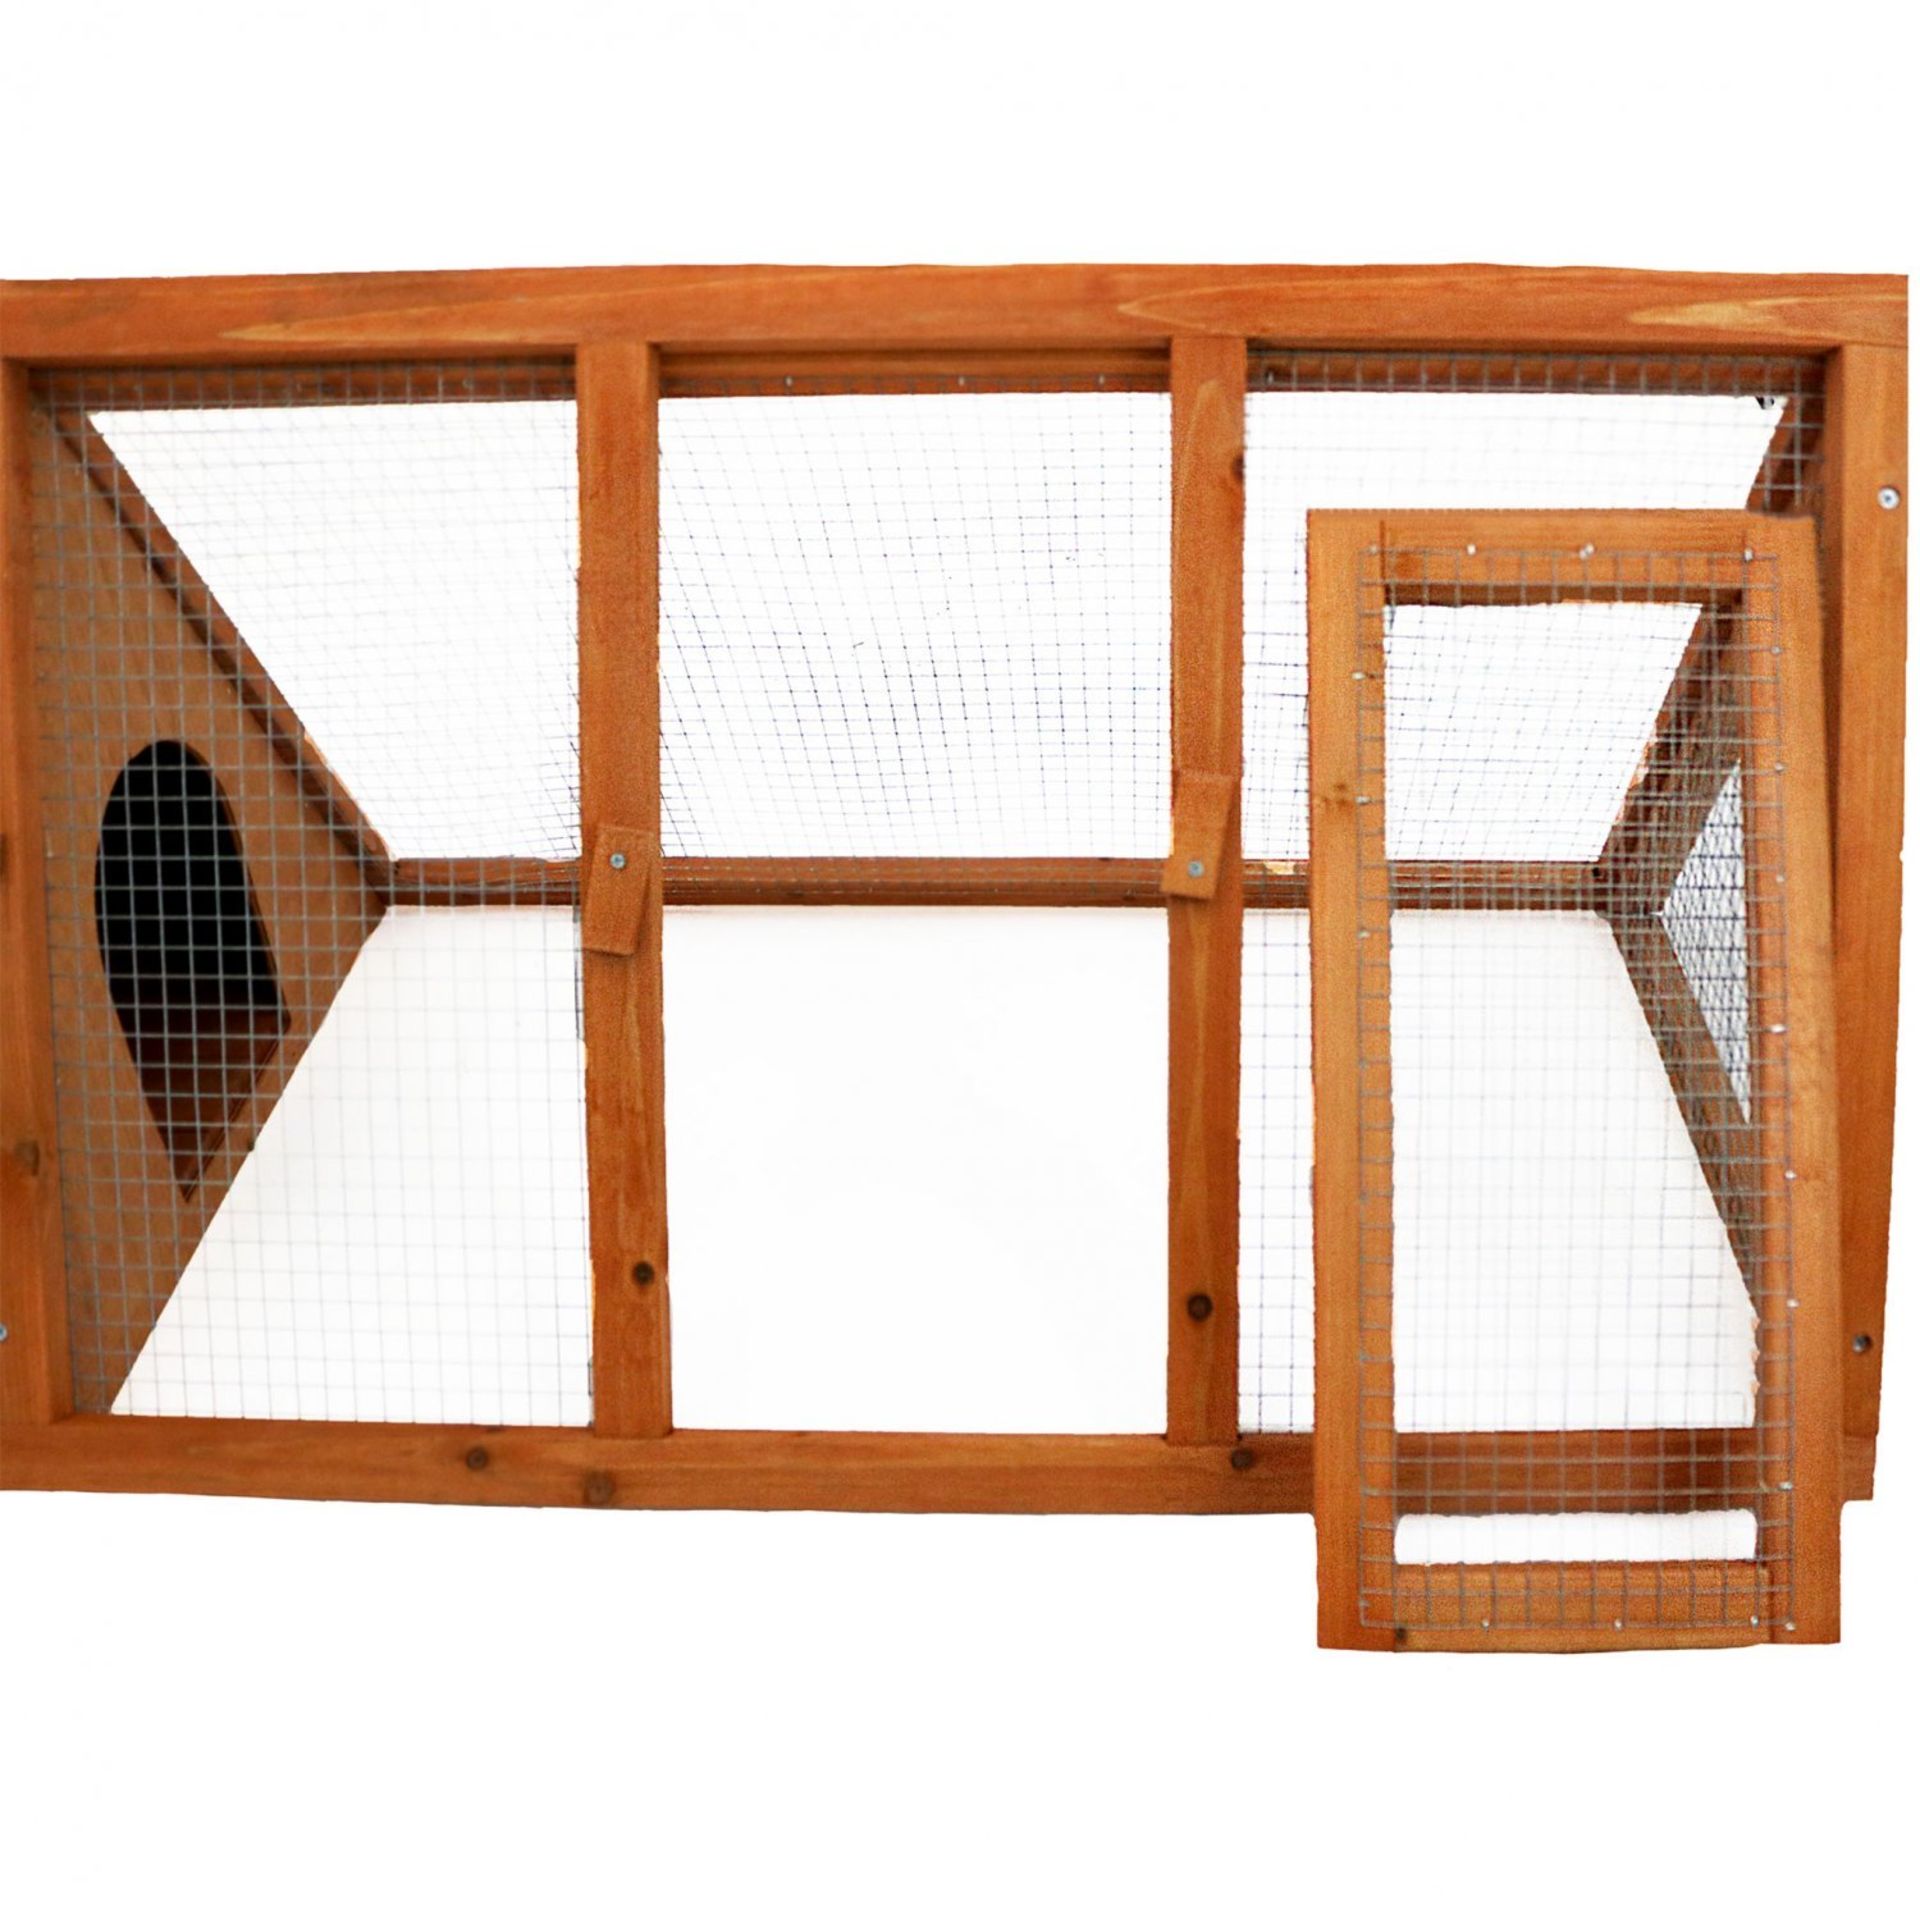 (LF1) Wooden Outdoor Triangle Rabbit Guinea Pig Pet Hutch Run Cage The triangle hutch is per... - Image 2 of 2